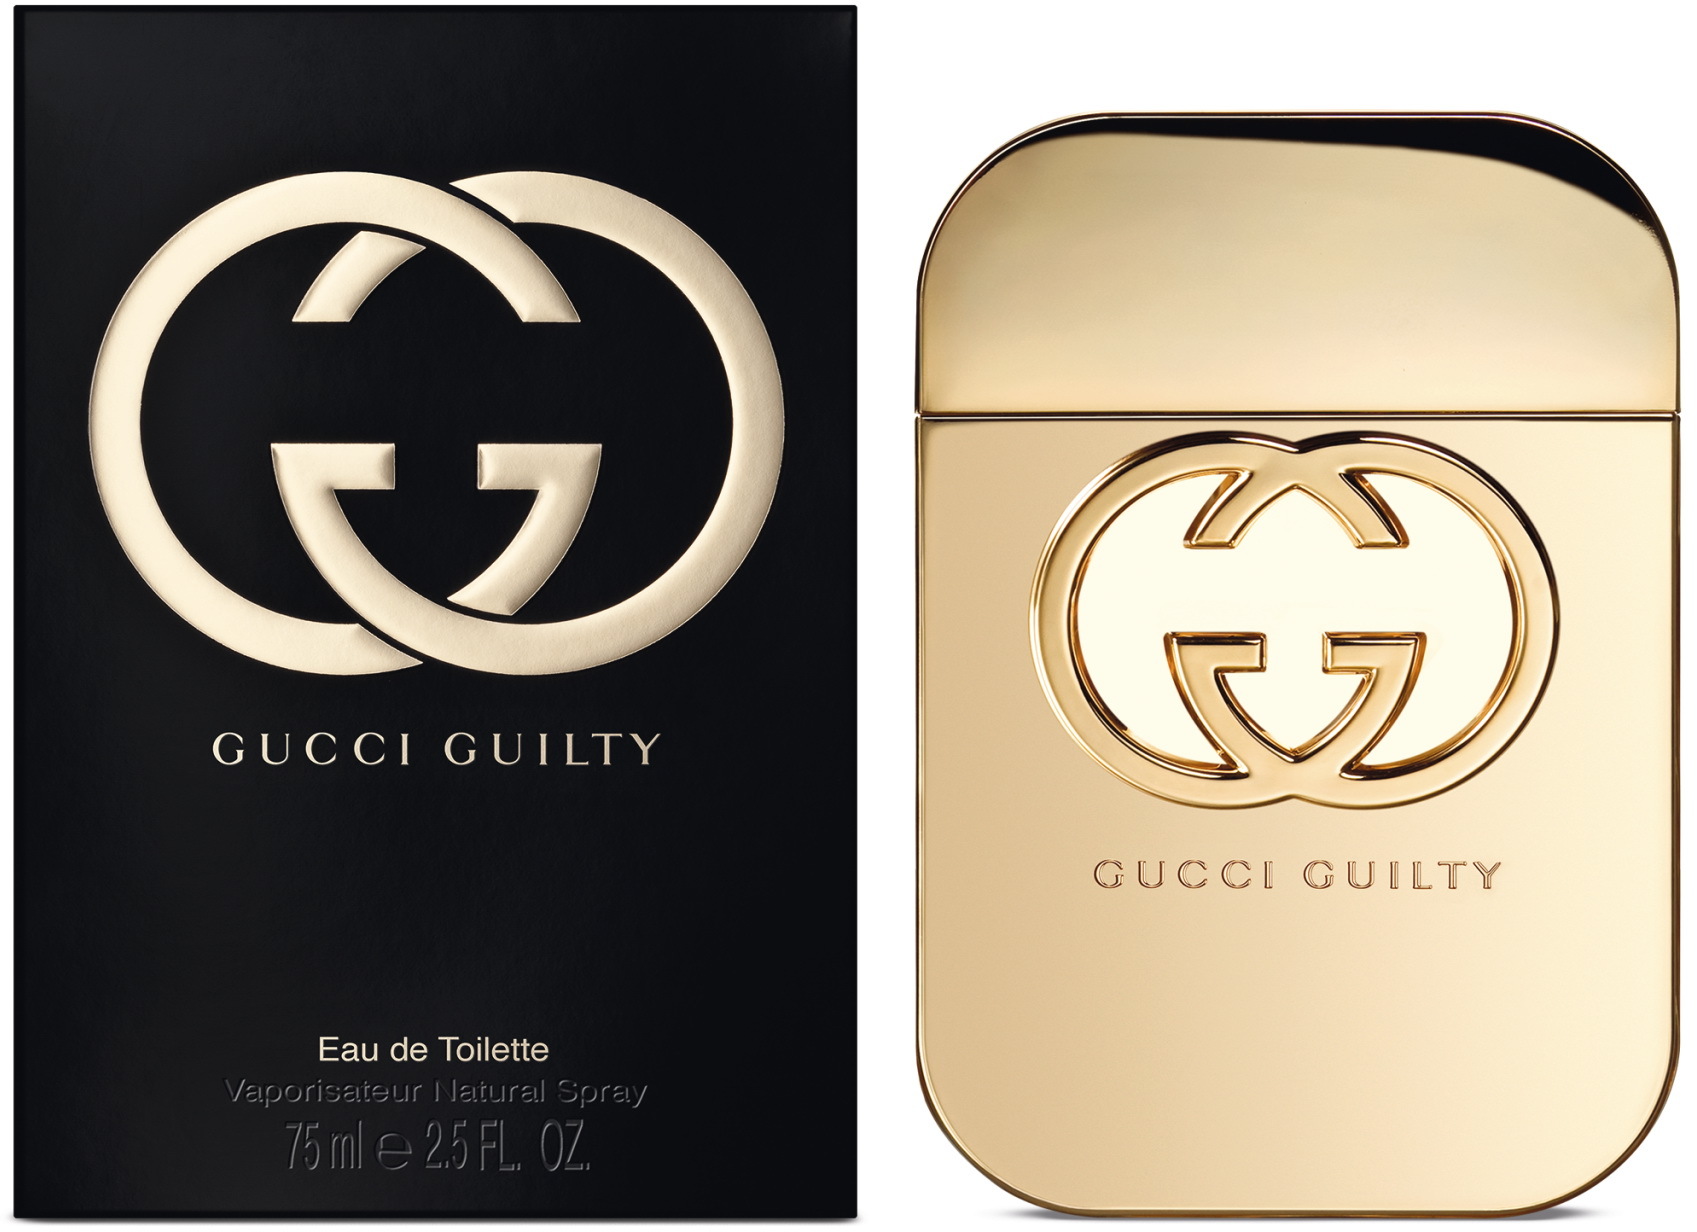 Gucci Guilty EdT 75ml in duty-free at 